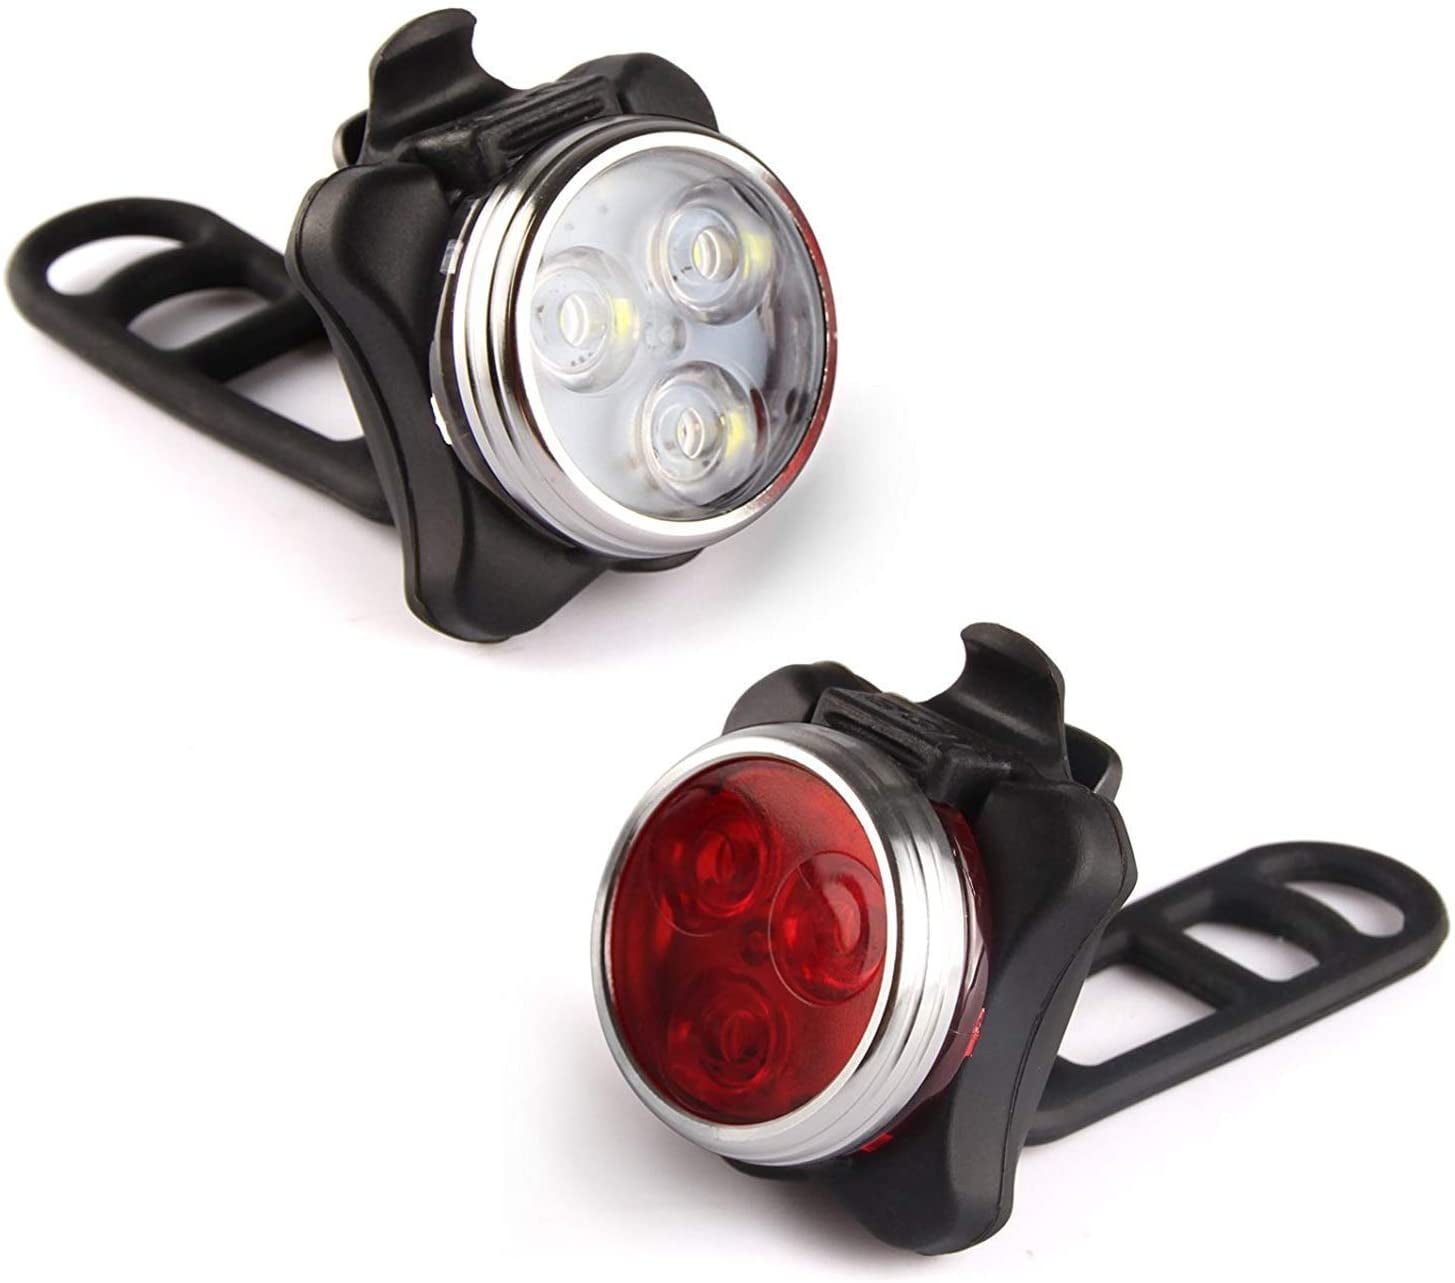 Rechargeable Front&rear 5 led light set-small bright lights red white lamp bike 